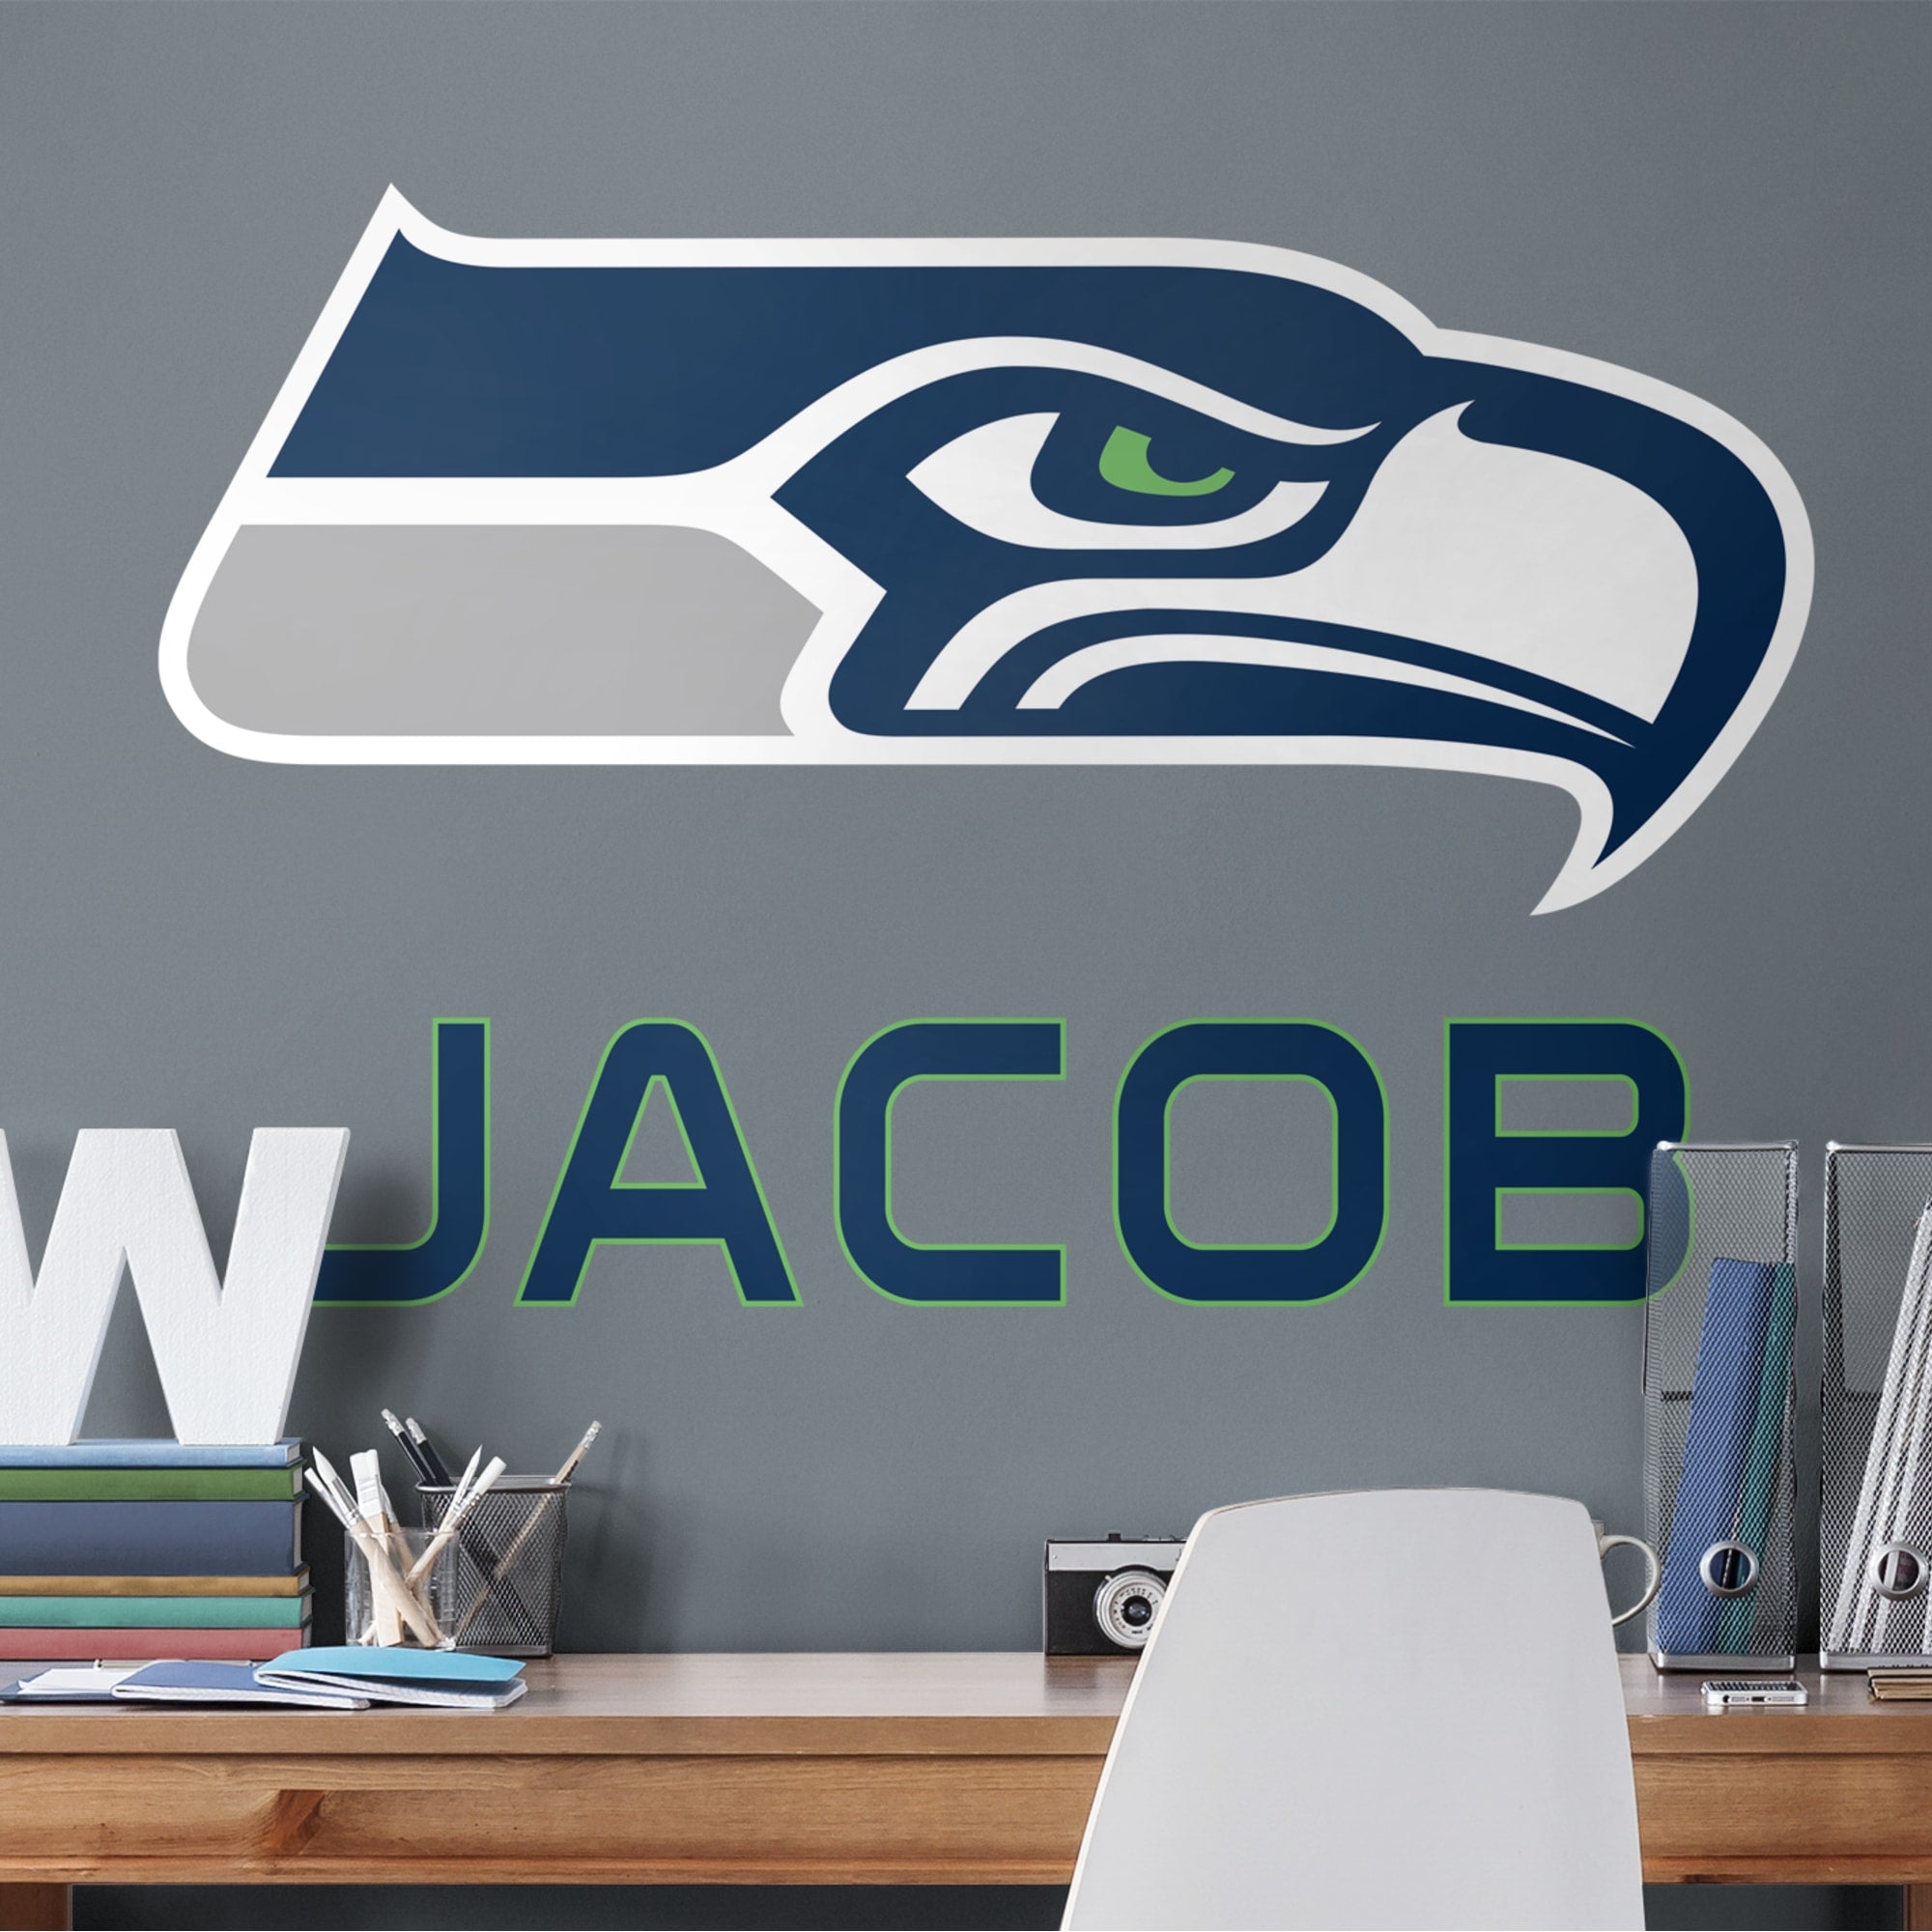 Seattle Seahawks: Stacked Personalized Name - Officially Licensed NFL Transfer Decal in Navy (52"W x 39.5"H) by Fathead | Vinyl